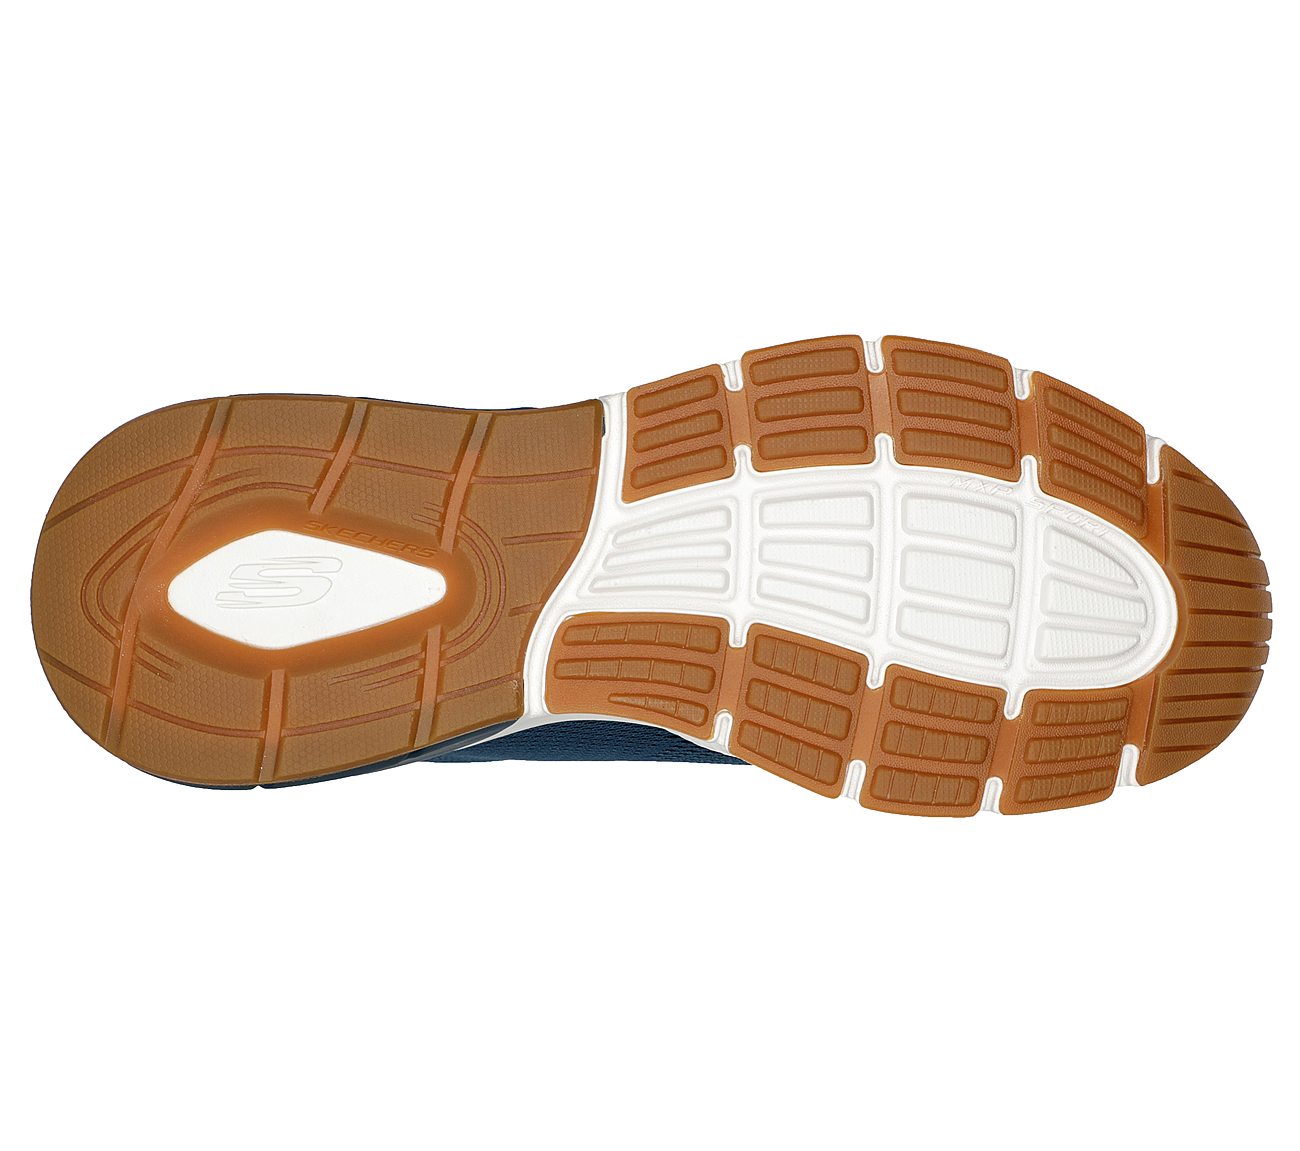 MAX PROTECT SPORT - SAFEGUARD, TEAL Footwear Bottom View